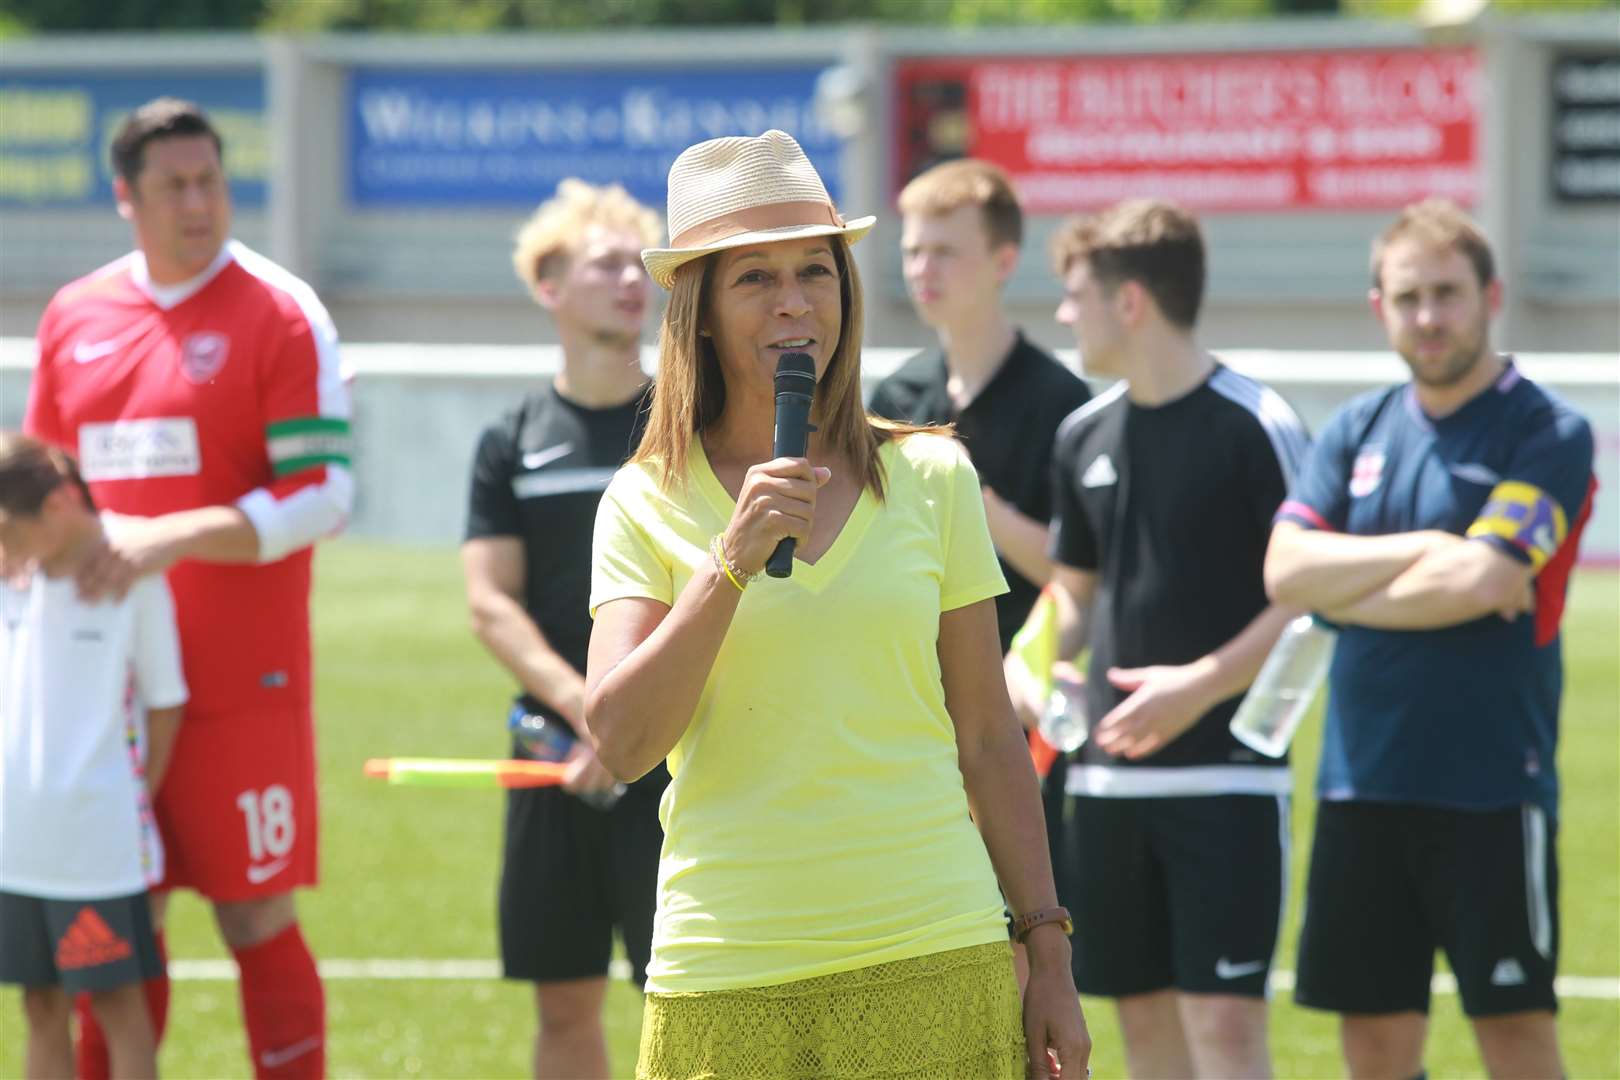 Helen Grant, MP opens the event at the Gallagher Stadium